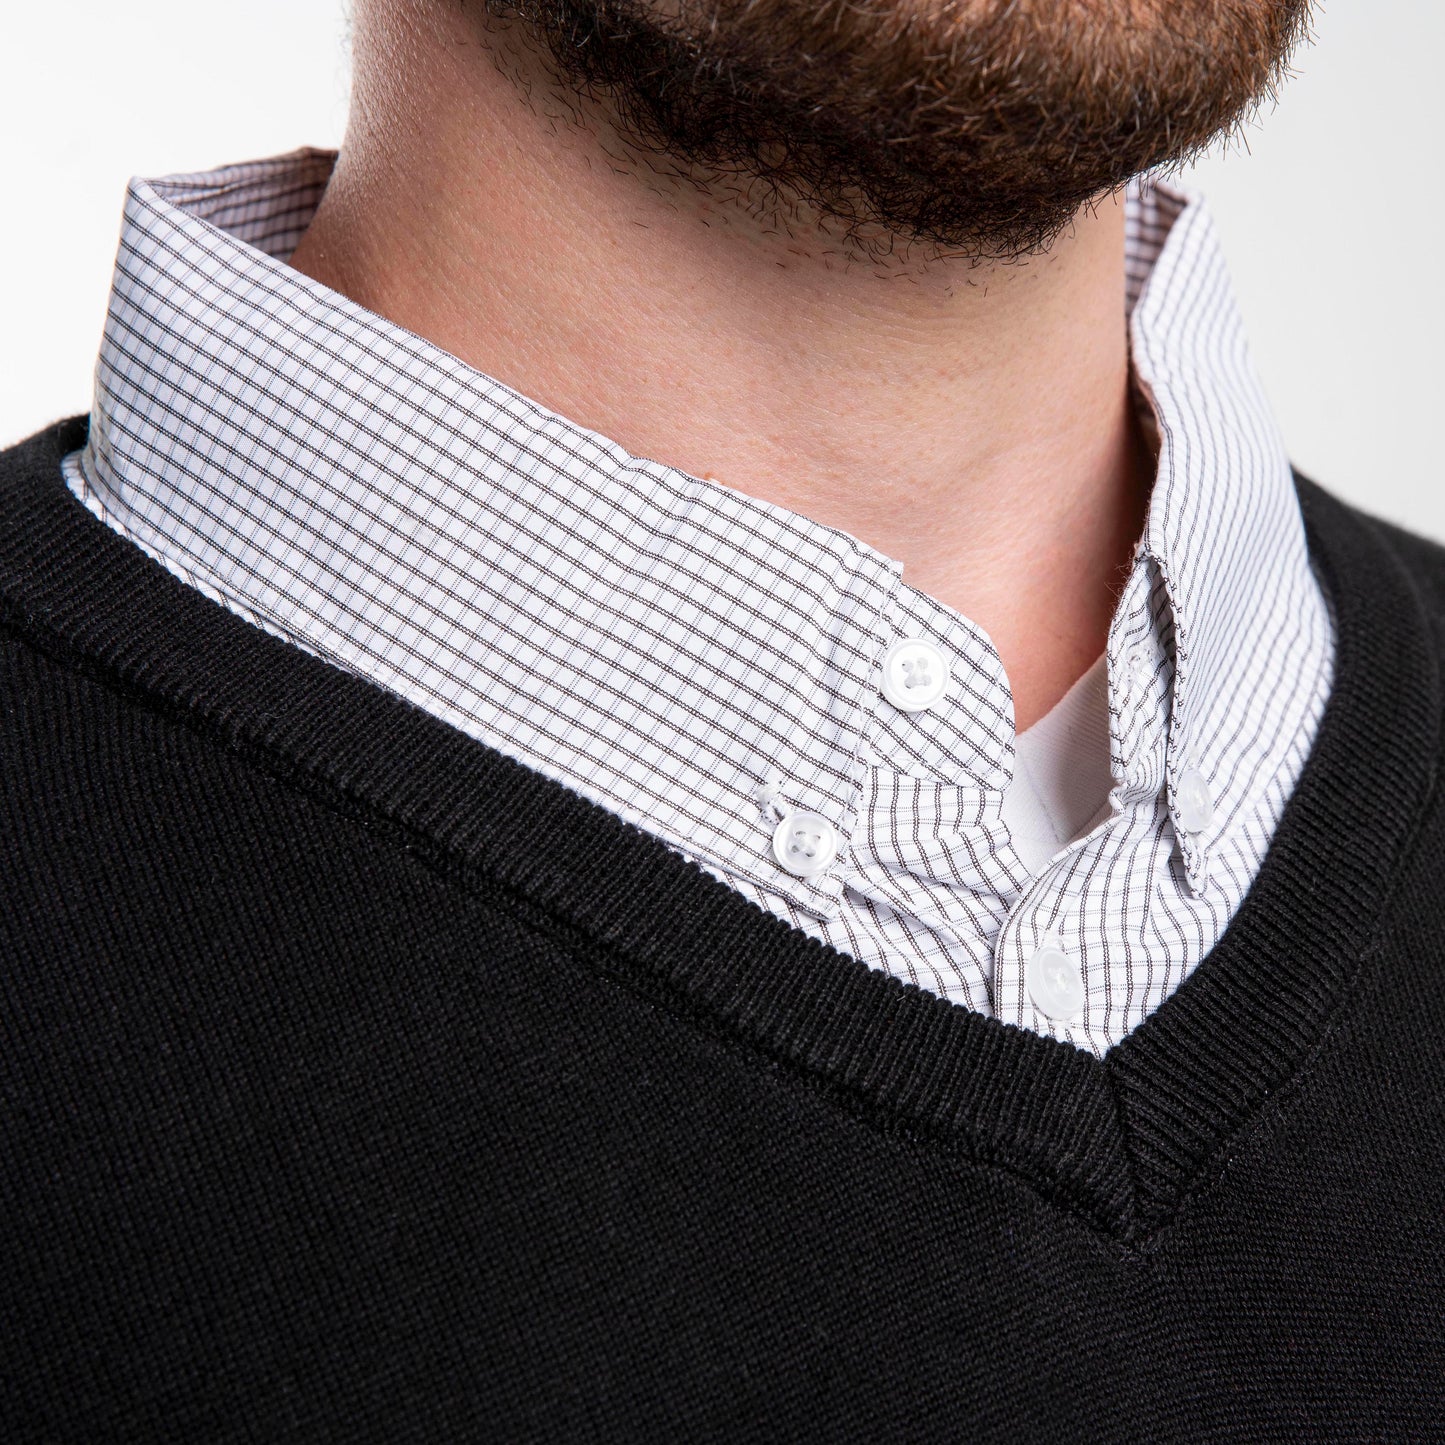 Classic Black Sweater with Black Check Collar